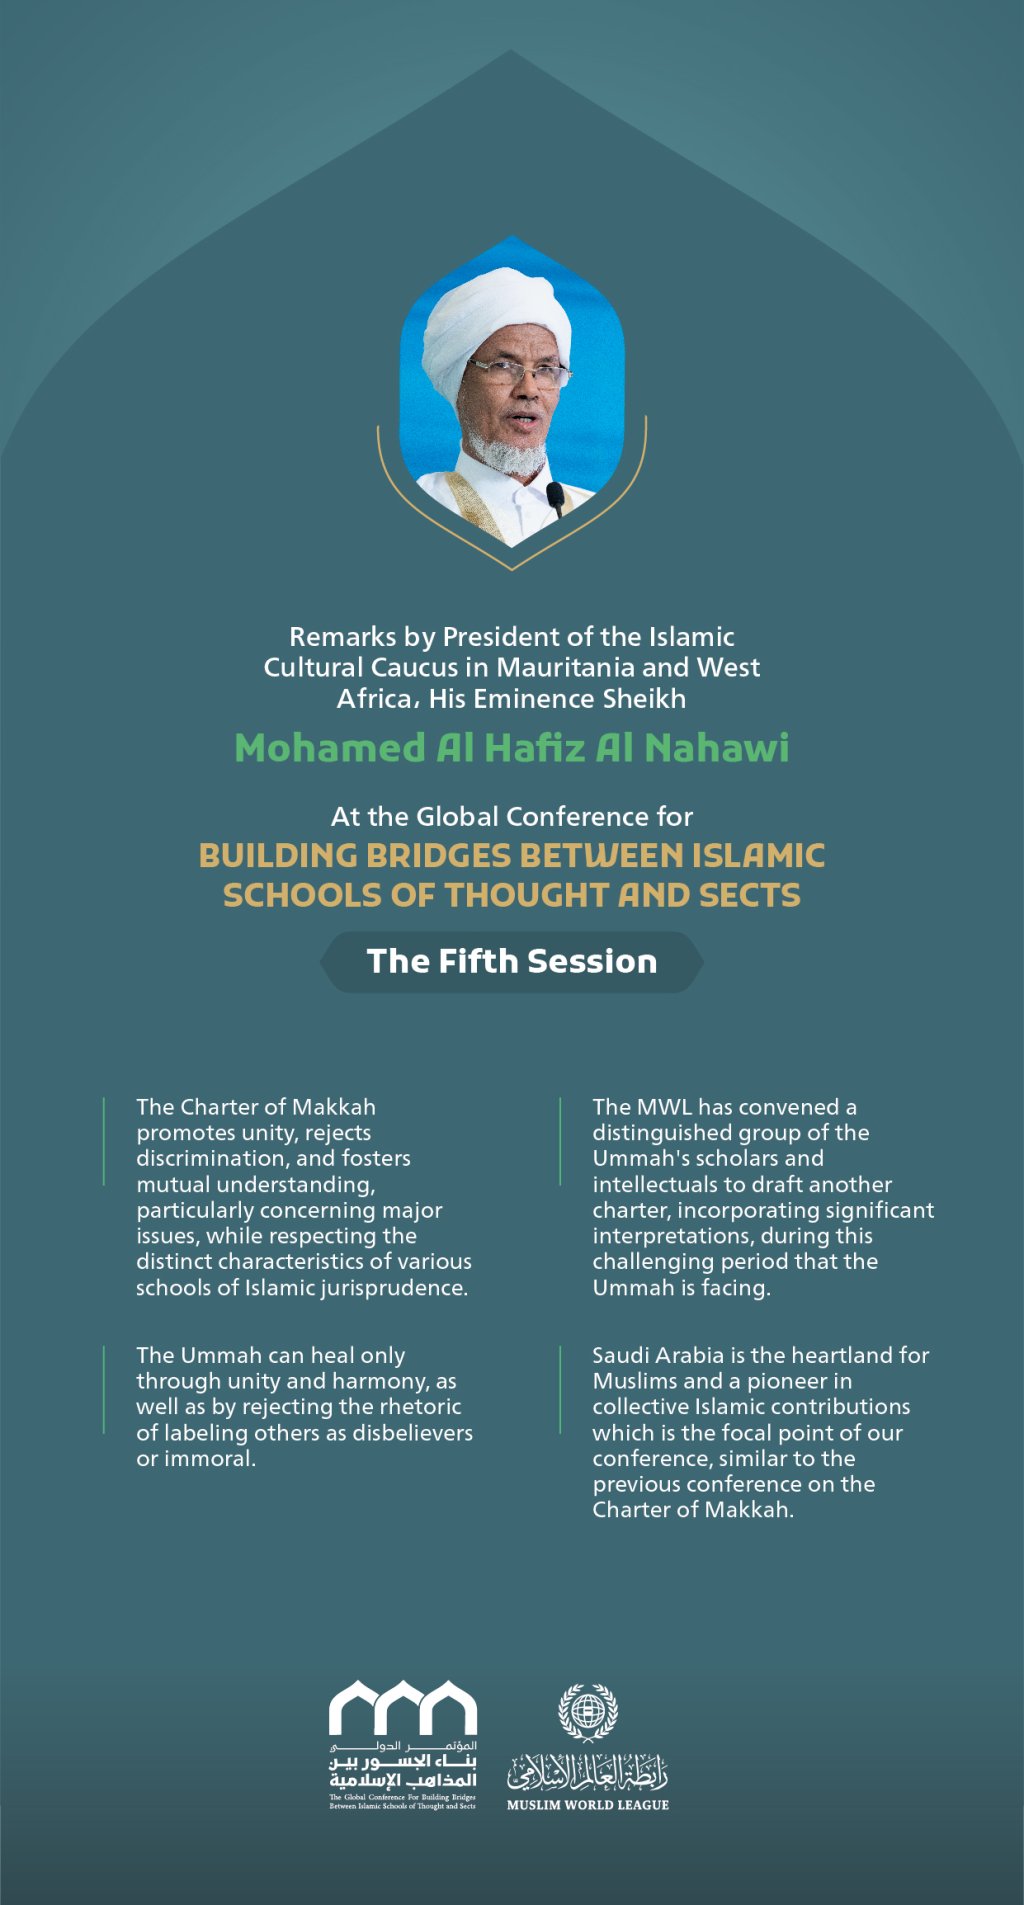 Remarks by His Eminence Sheikh Mohamed Al Hafiz Al Nahawi, President of the Islamic Cultural Caucus in Mauritania and West Africa at the Global Conference for Building Bridges between Islamic Schools of Thought and Sects.